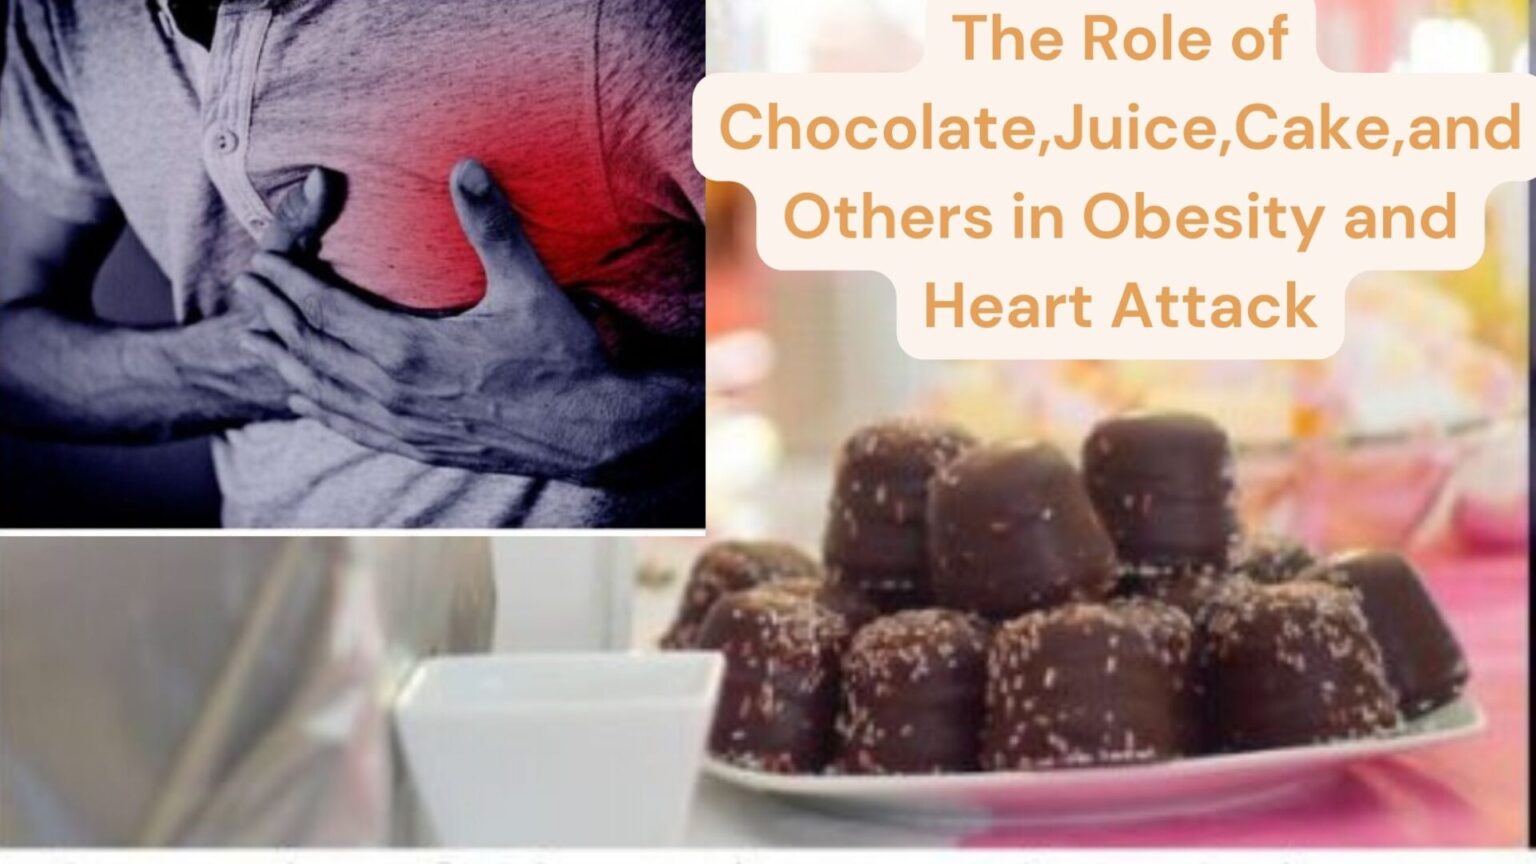 The Role of Chocolate,Juice,Cake,and Others in Obesity and Heart Attack